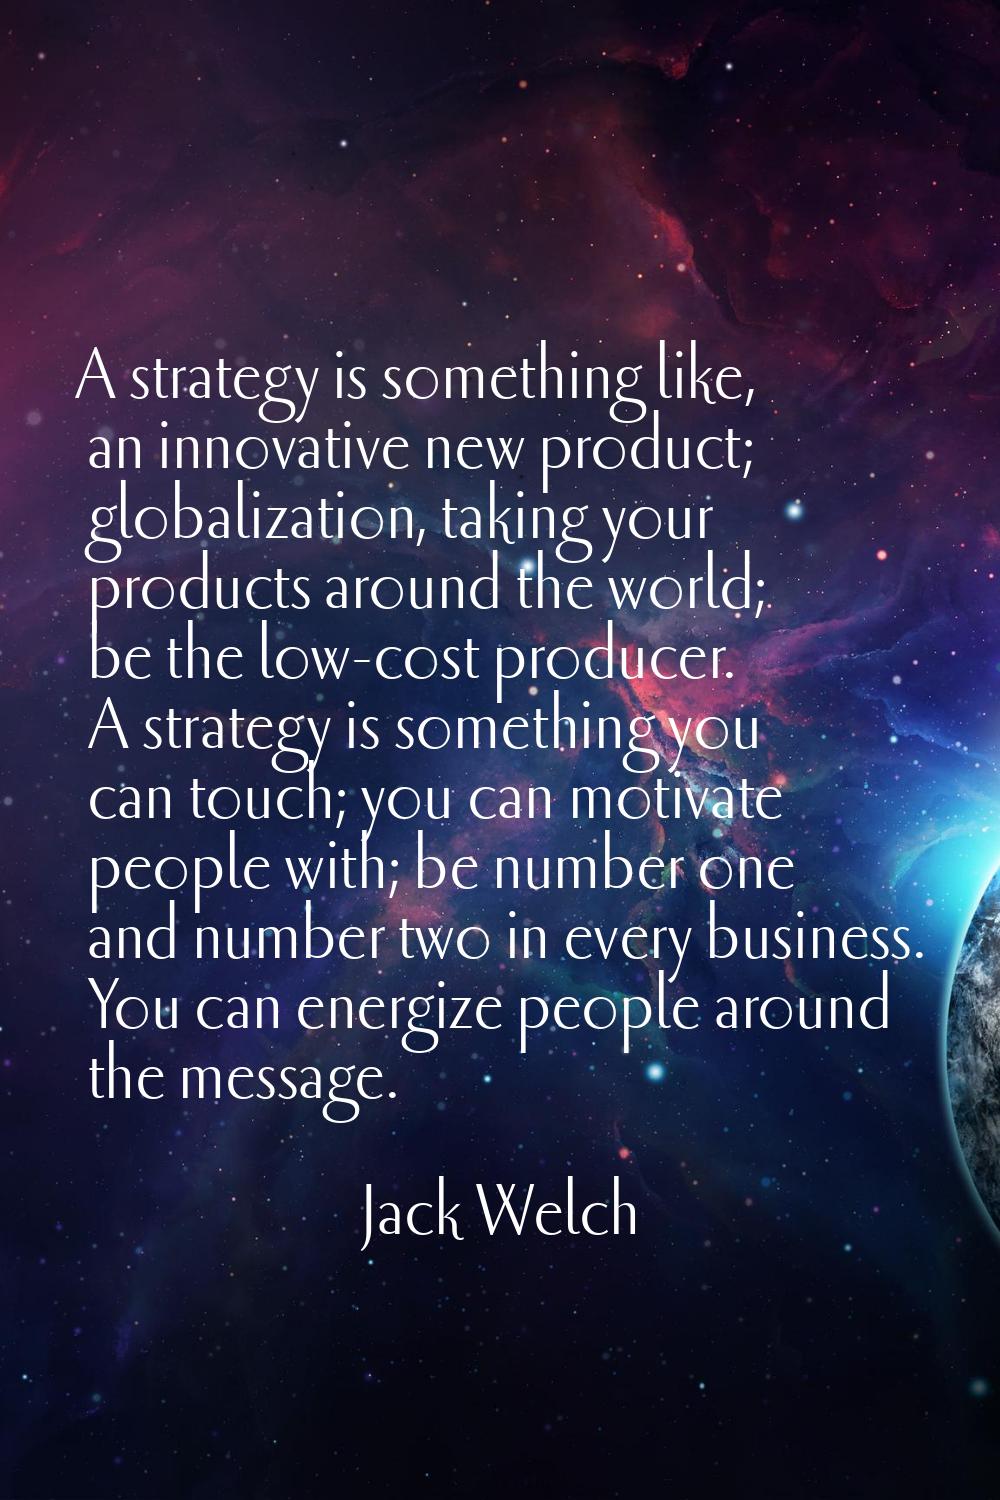 A strategy is something like, an innovative new product; globalization, taking your products around